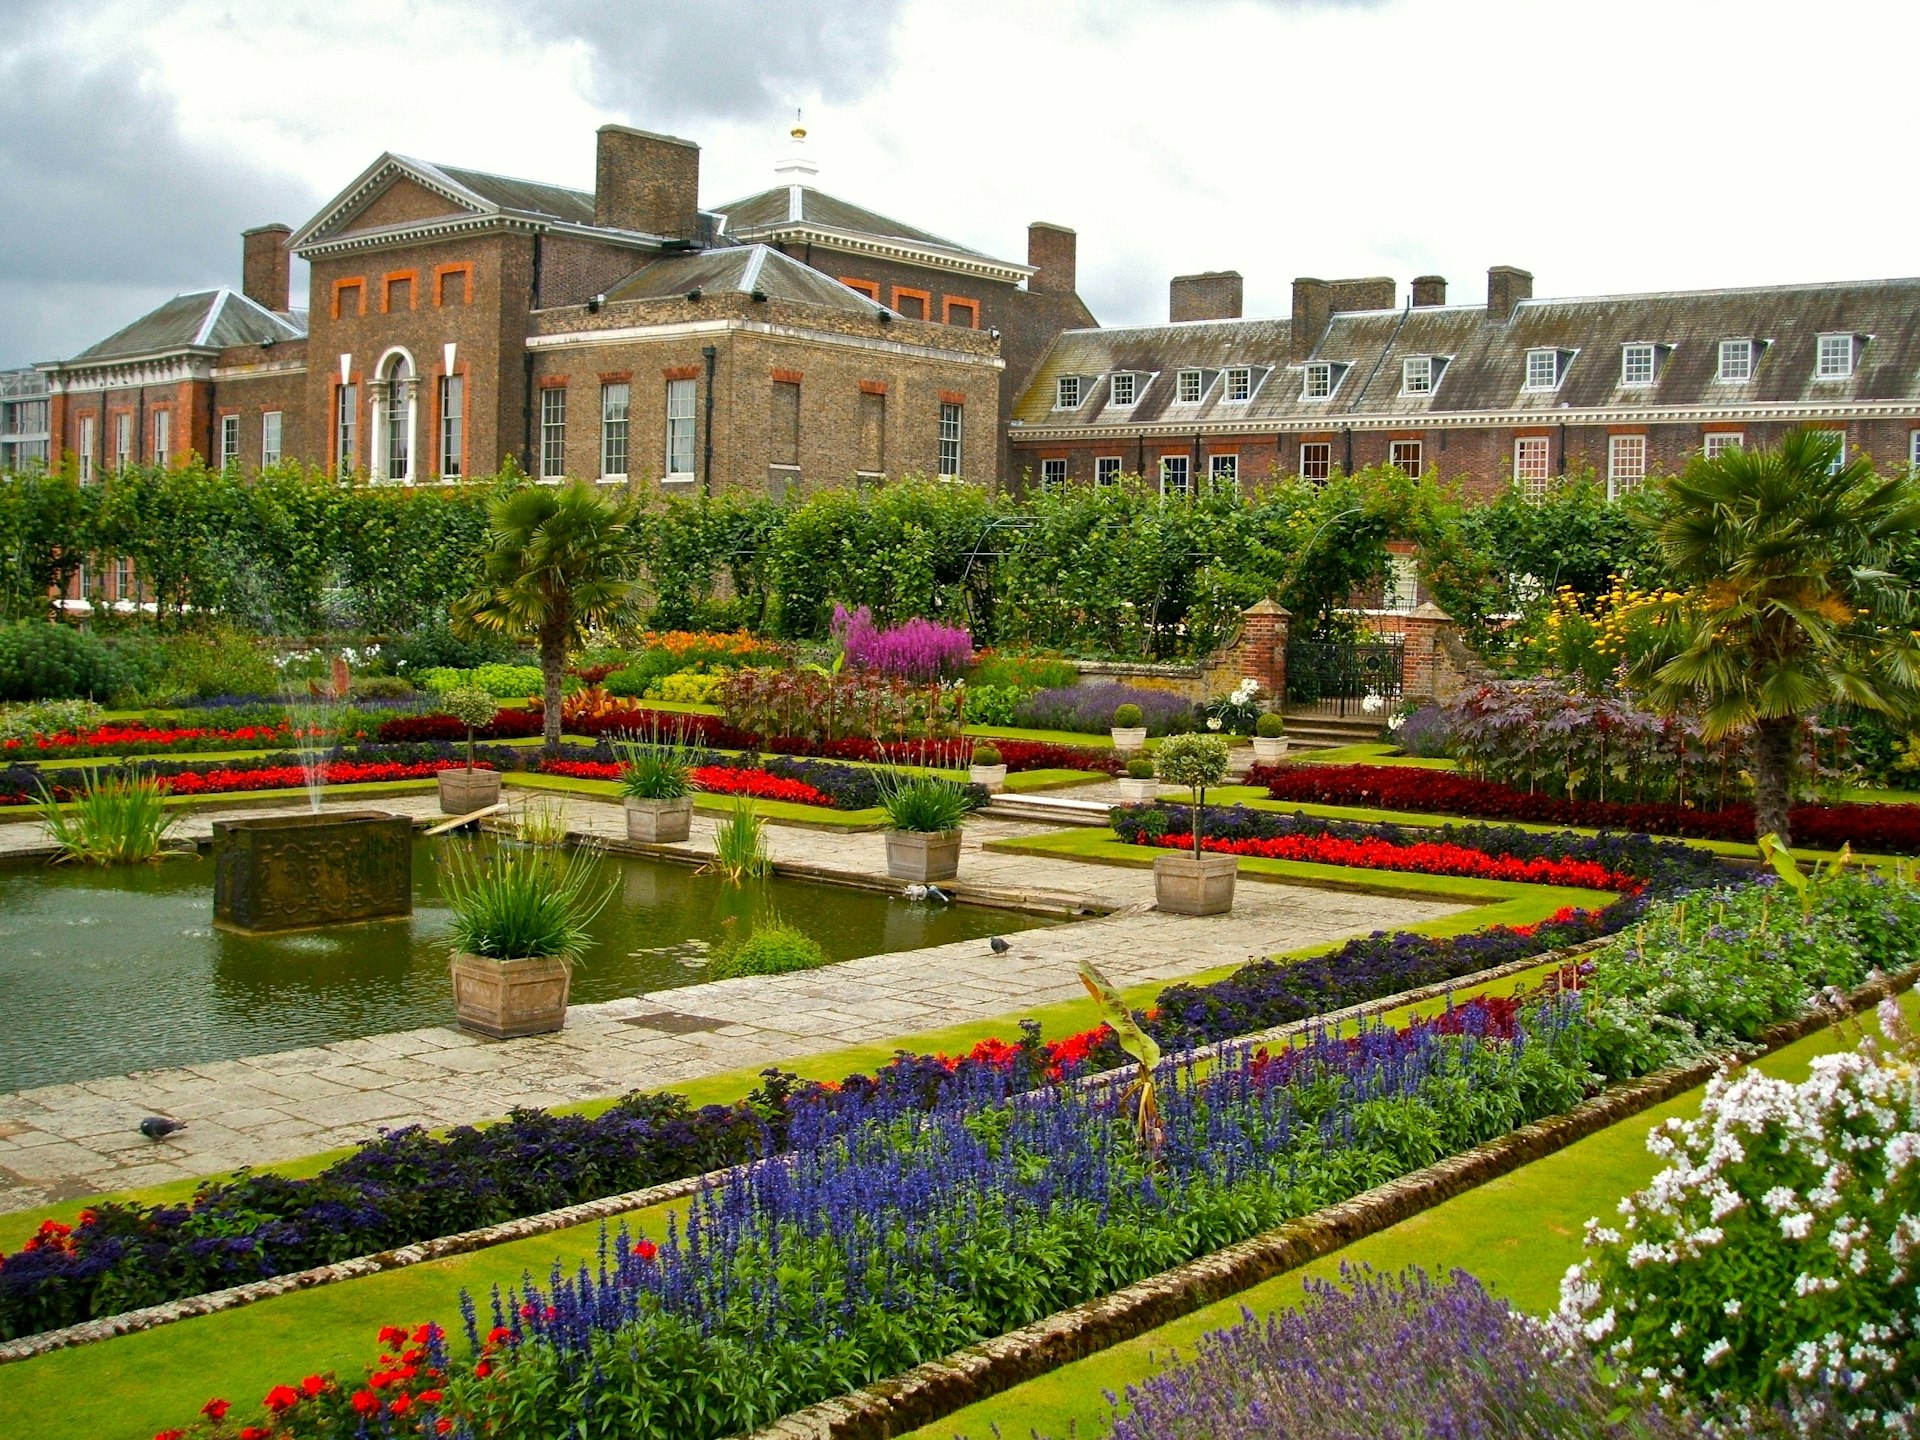 Kensington Gardens is one of London’s eight Royal Parks and covers an area of 265 acres.